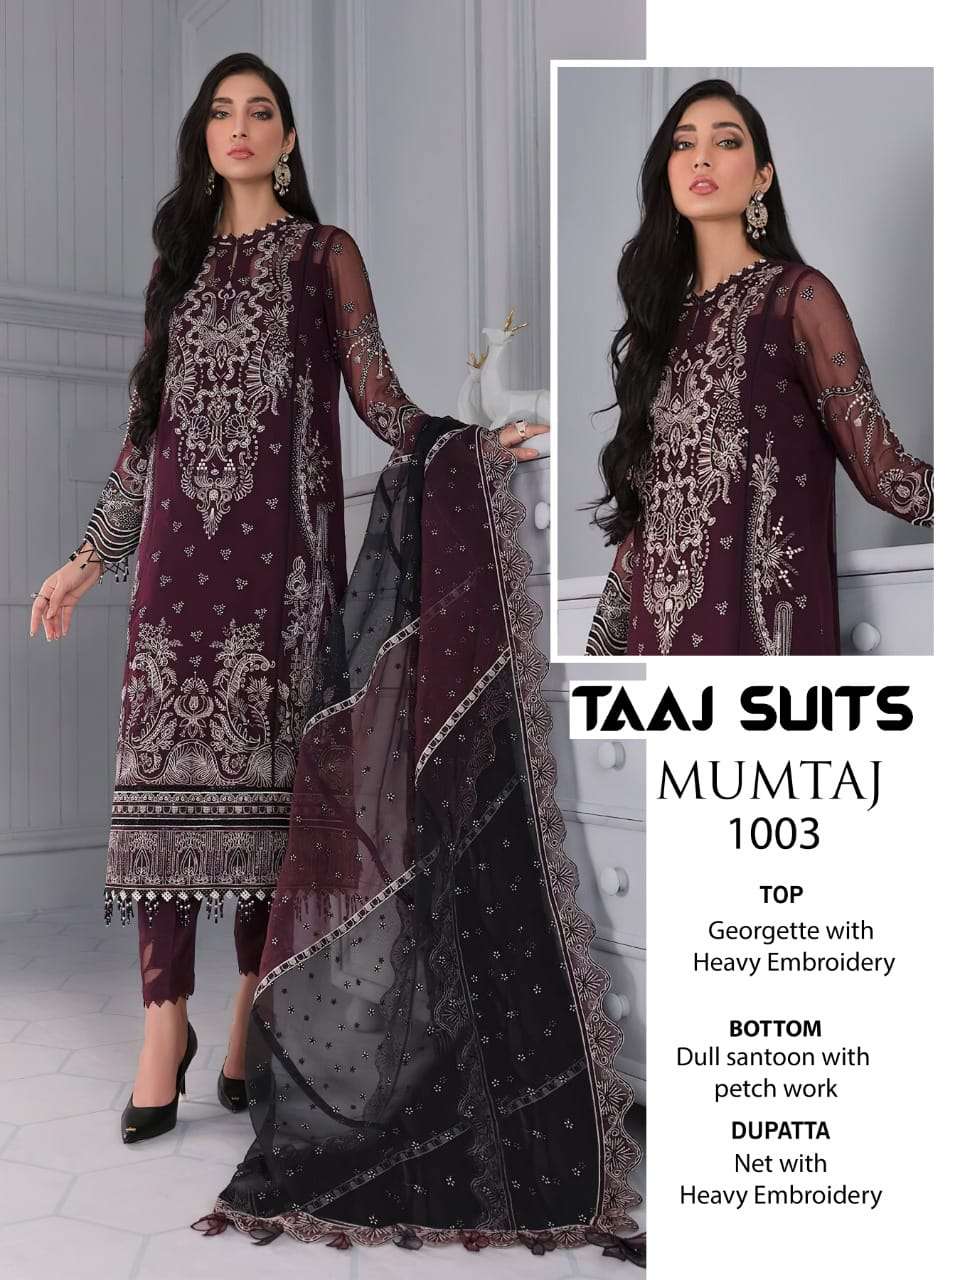 MUMTAZ BY TAAJ SUITS 1001 TO 1003 SERIES BEAUTIFUL PAKISTANI SUITS COLORFUL STYLISH FANCY CASUAL WEAR & ETHNIC WEAR GEORGETTE EMBROIDERED DRESSES AT WHOLESALE PRICE